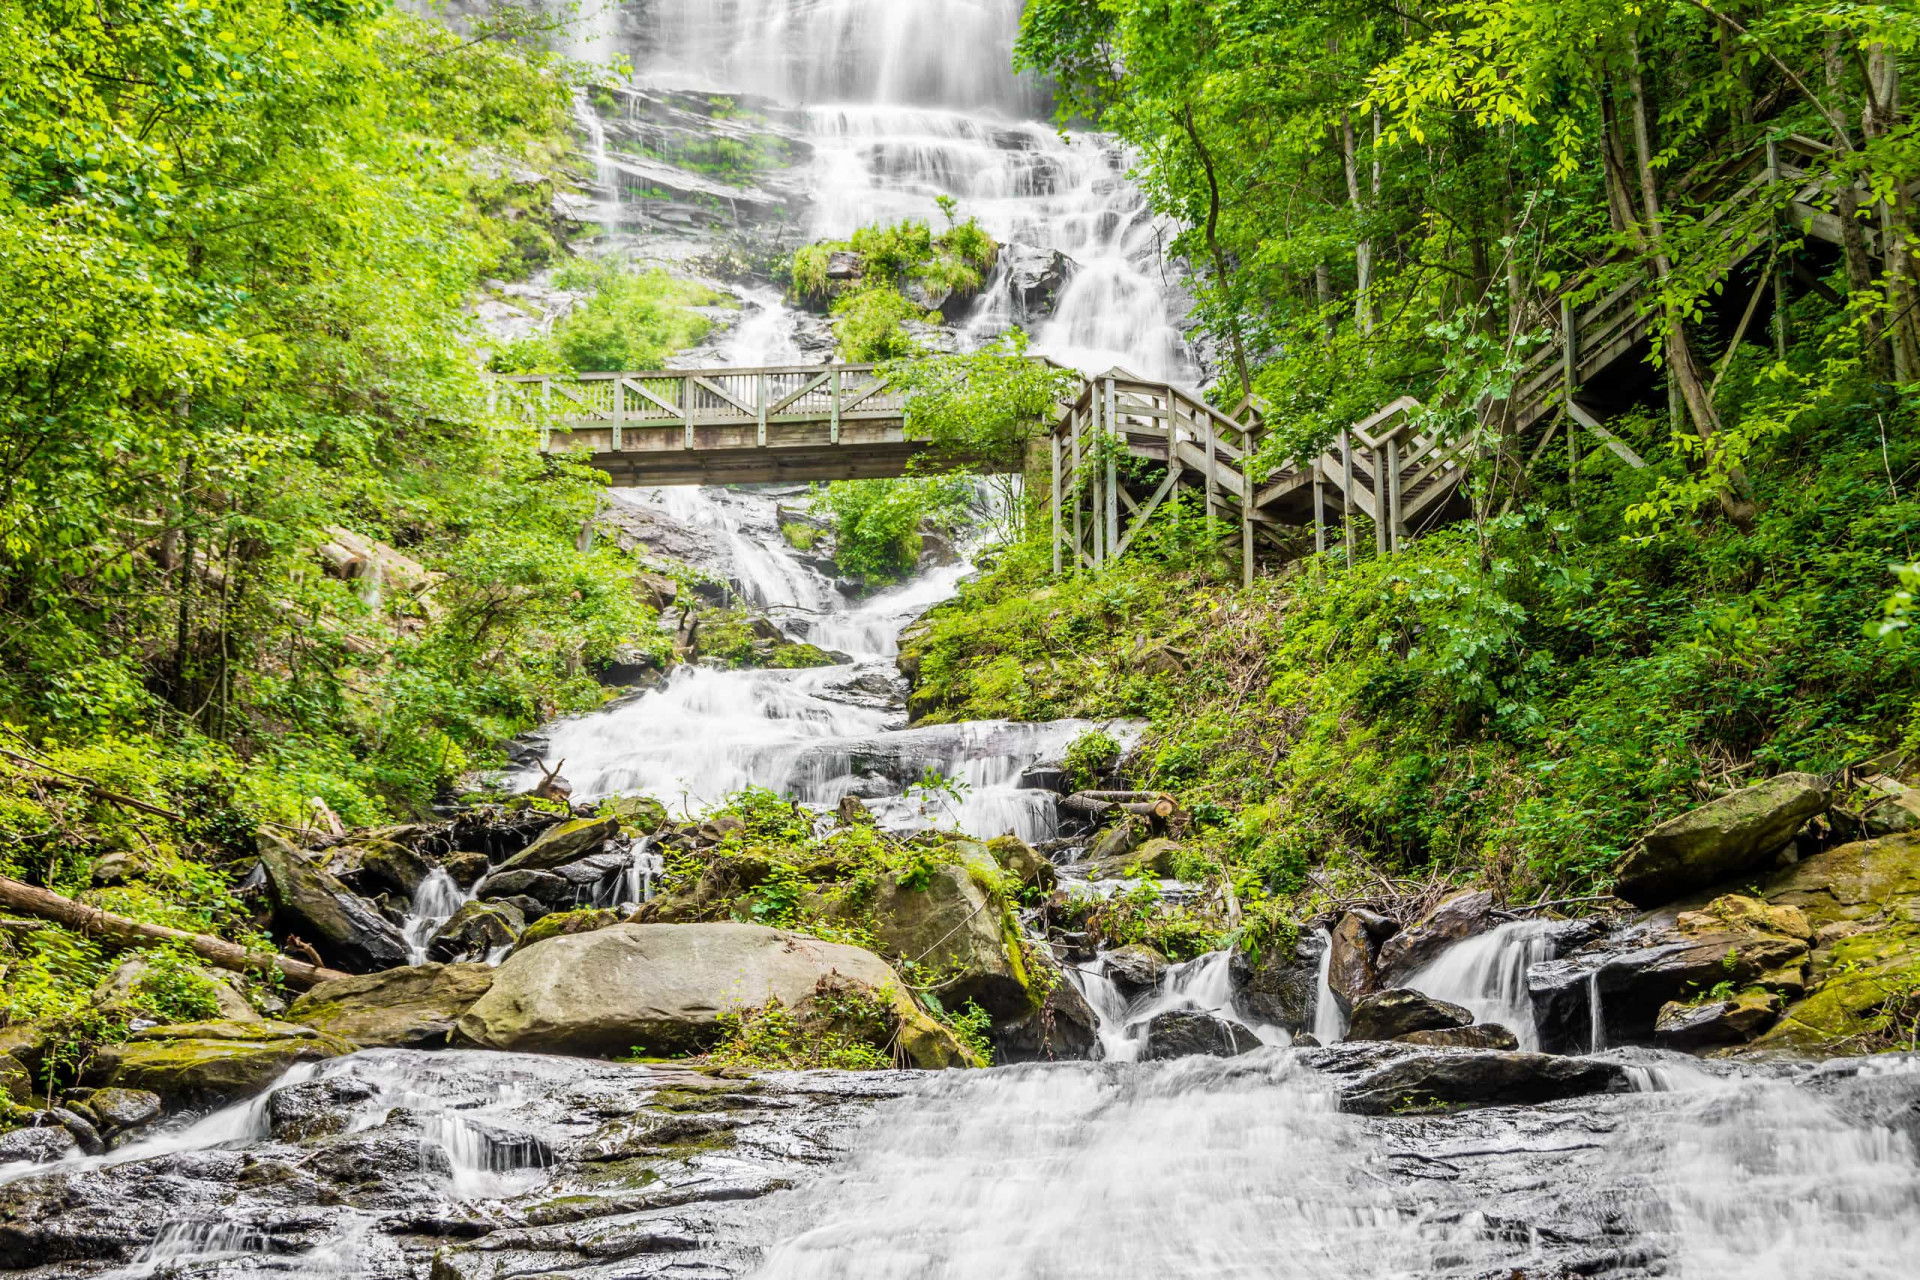 <p>Located in Dawson County, this impressive state park is home to Georgia's largest waterfall. The Amicalola Falls tumble 729 ft (222 m) down leafy mountainside, and can be admired from a bridge crossing the mighty waters.</p><p><a href="https://www.msn.com/en-us/community/channel/vid-7xx8mnucu55yw63we9va2gwr7uihbxwc68fxqp25x6tg4ftibpra?cvid=94631541bc0f4f89bfd59158d696ad7e">Follow us and access great exclusive content every day</a></p>